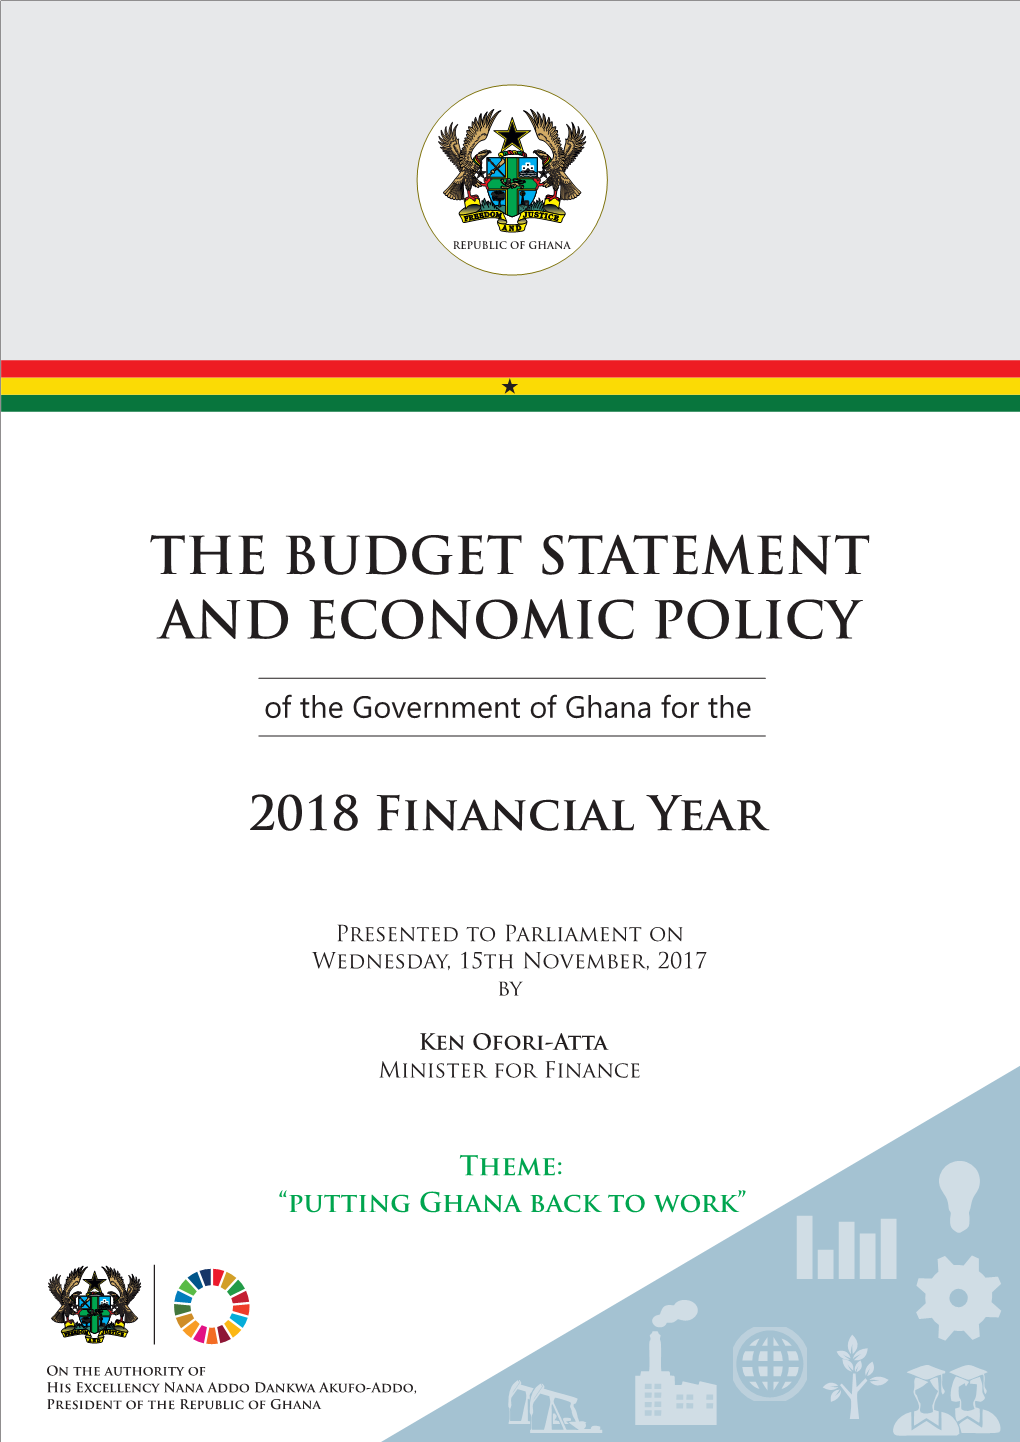 The Budget Statement and Economic Policy